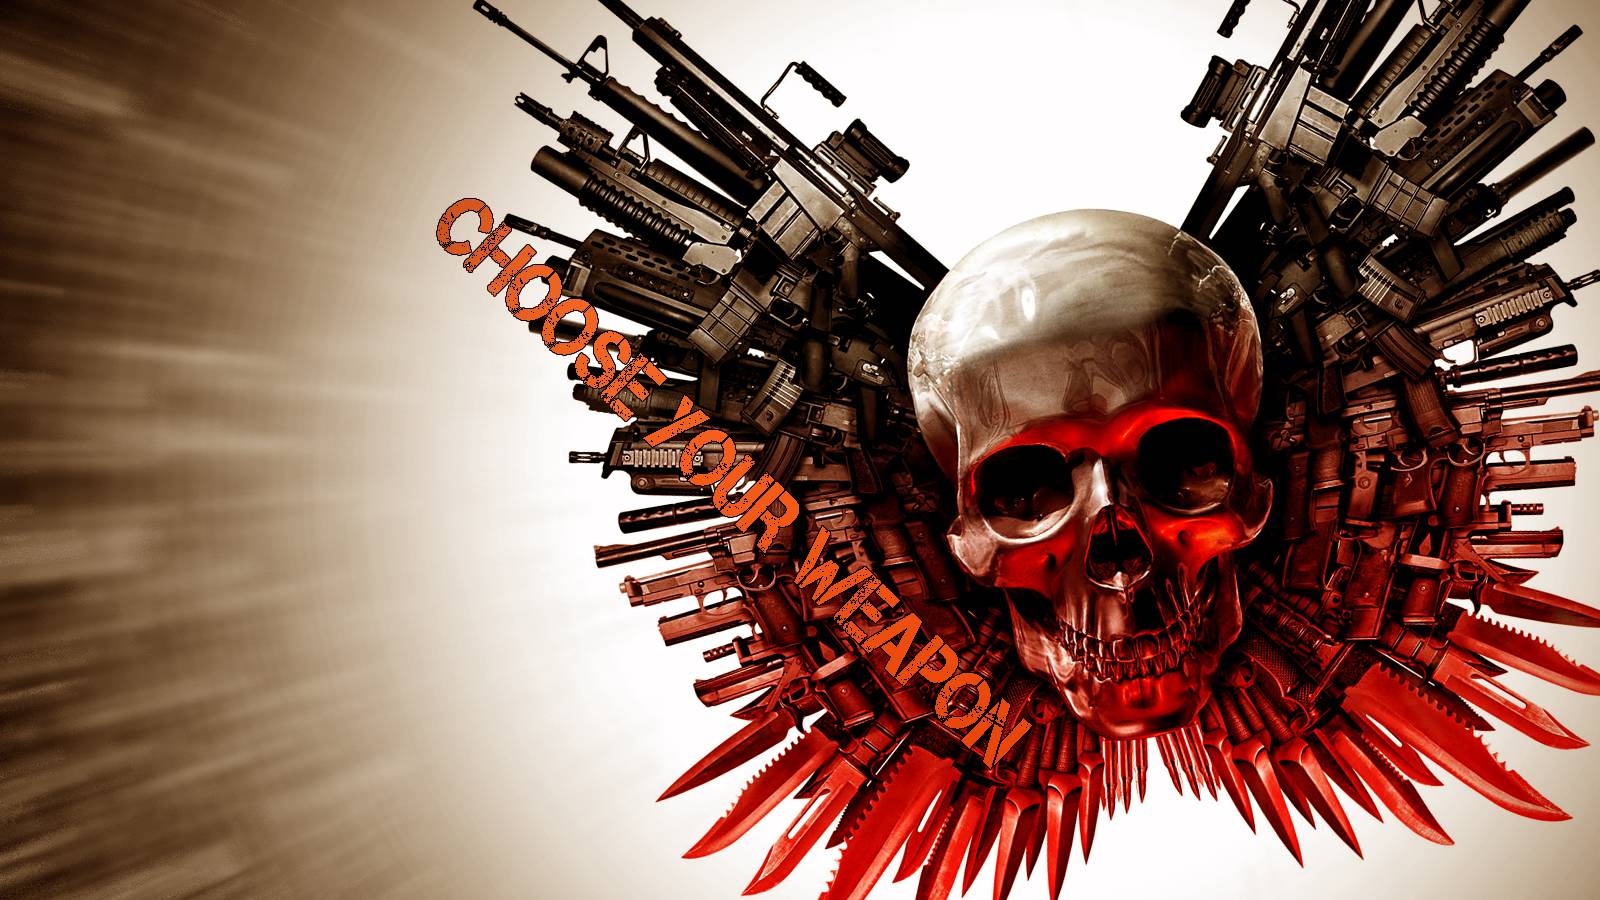 expendables wallpapers wallpaper cave on the expendables symbol wallpapers